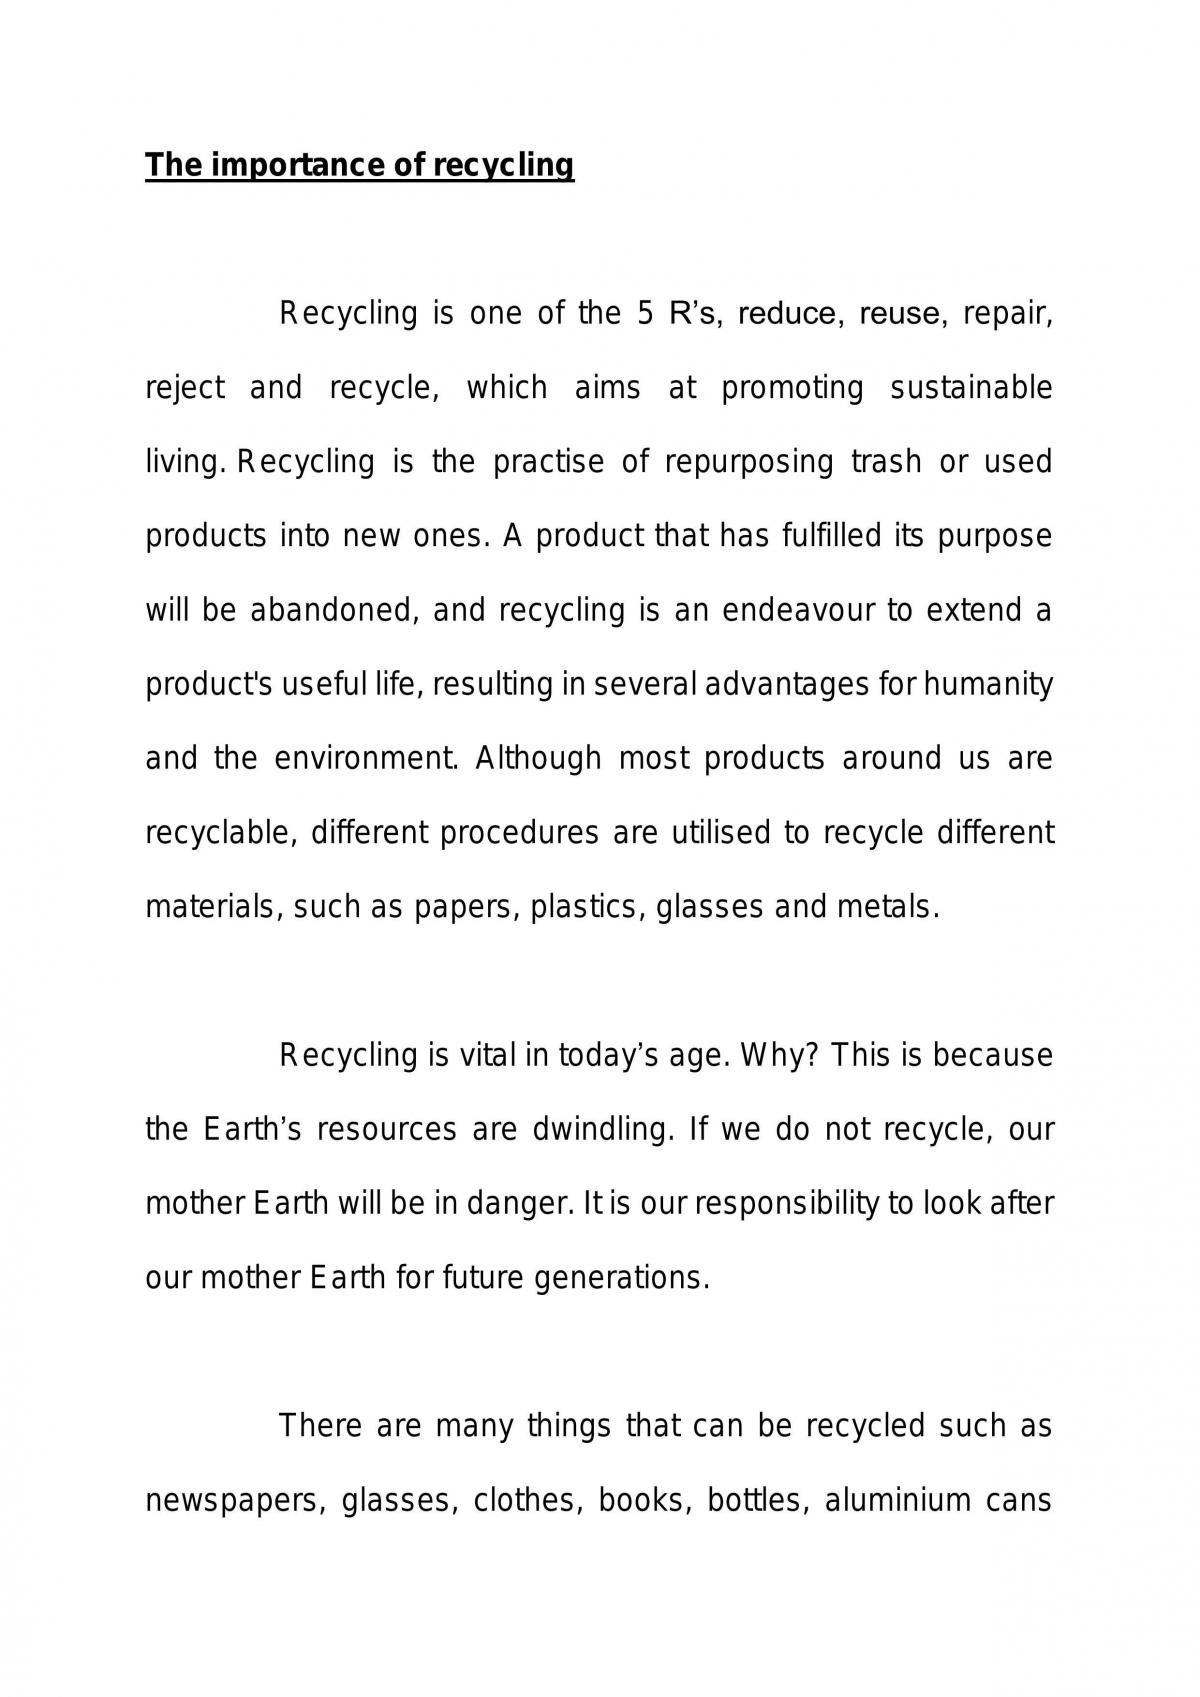 essay about saving resources through recycling